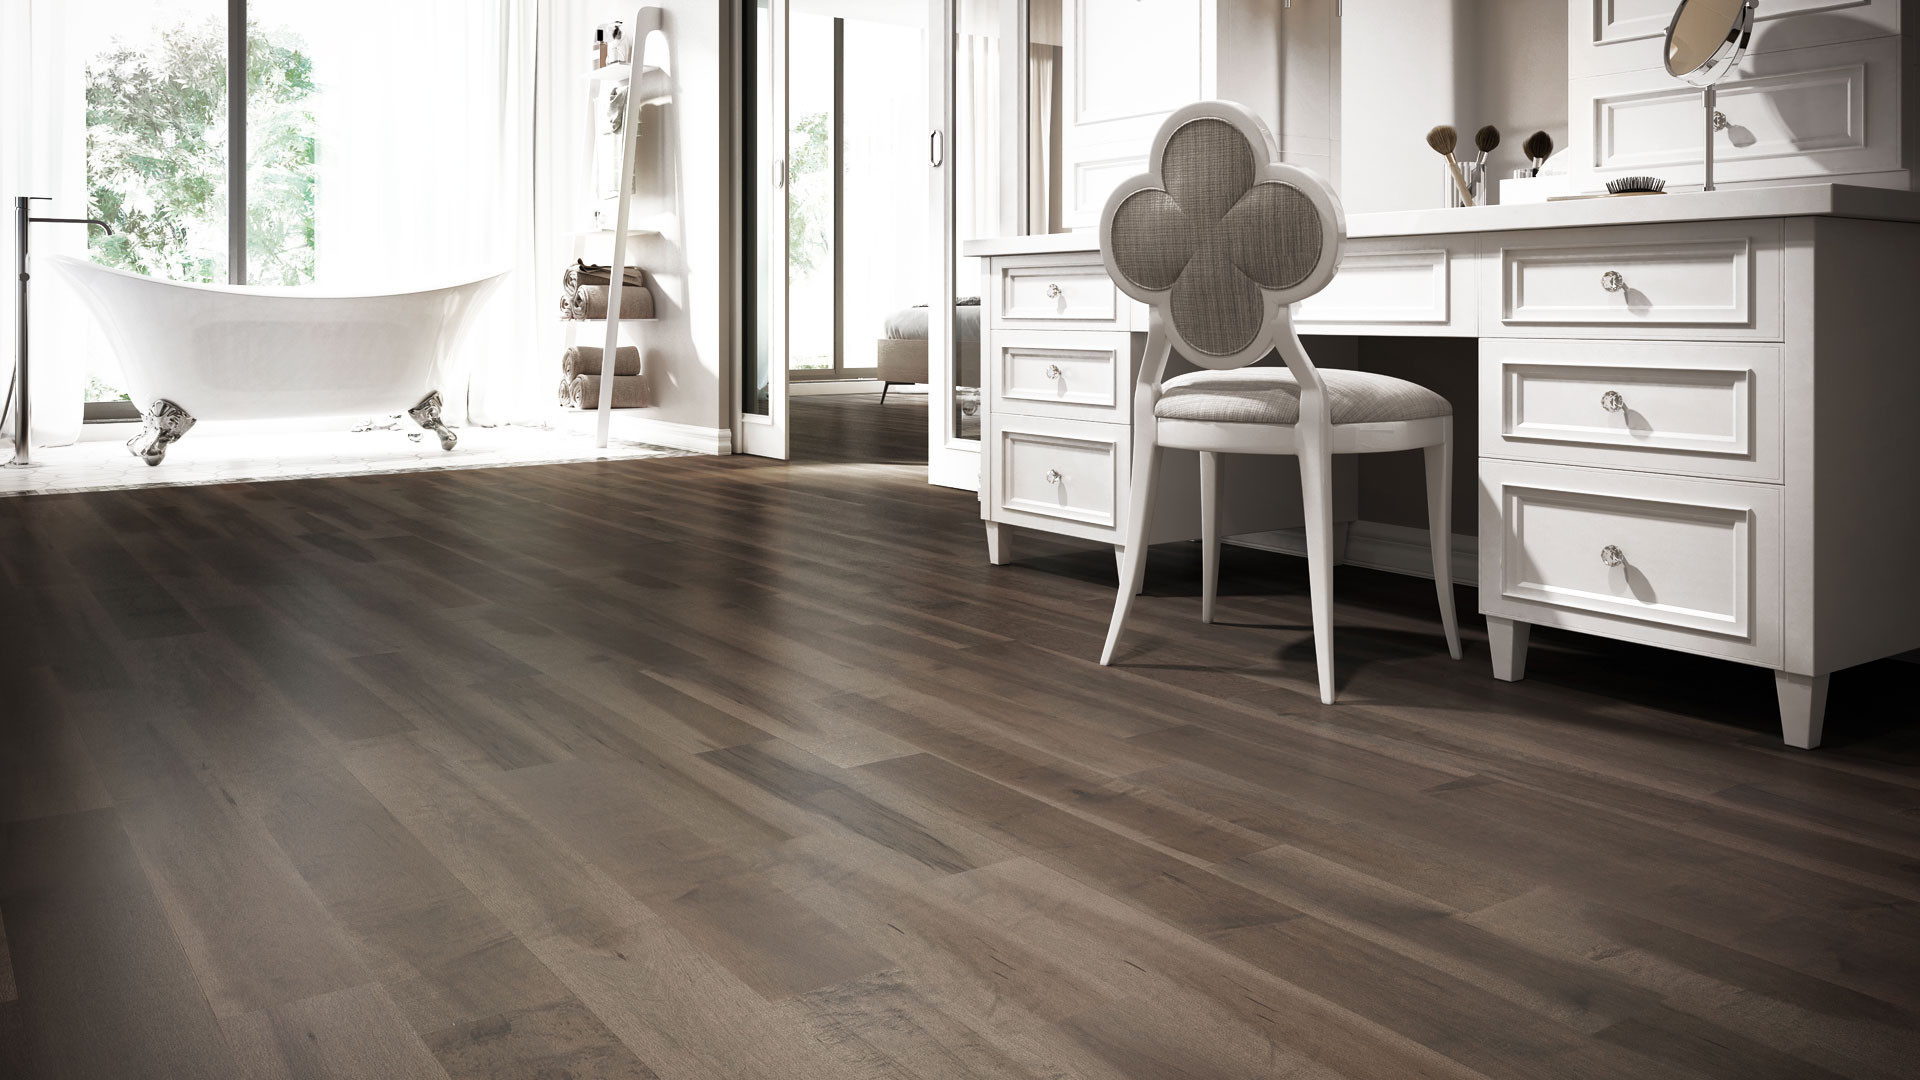 best hardwood flooring toronto of 4 latest hardwood flooring trends lauzon flooring inside learn more about our pure genius by reading our blog post the smartest hardwood flooring weve ever seen